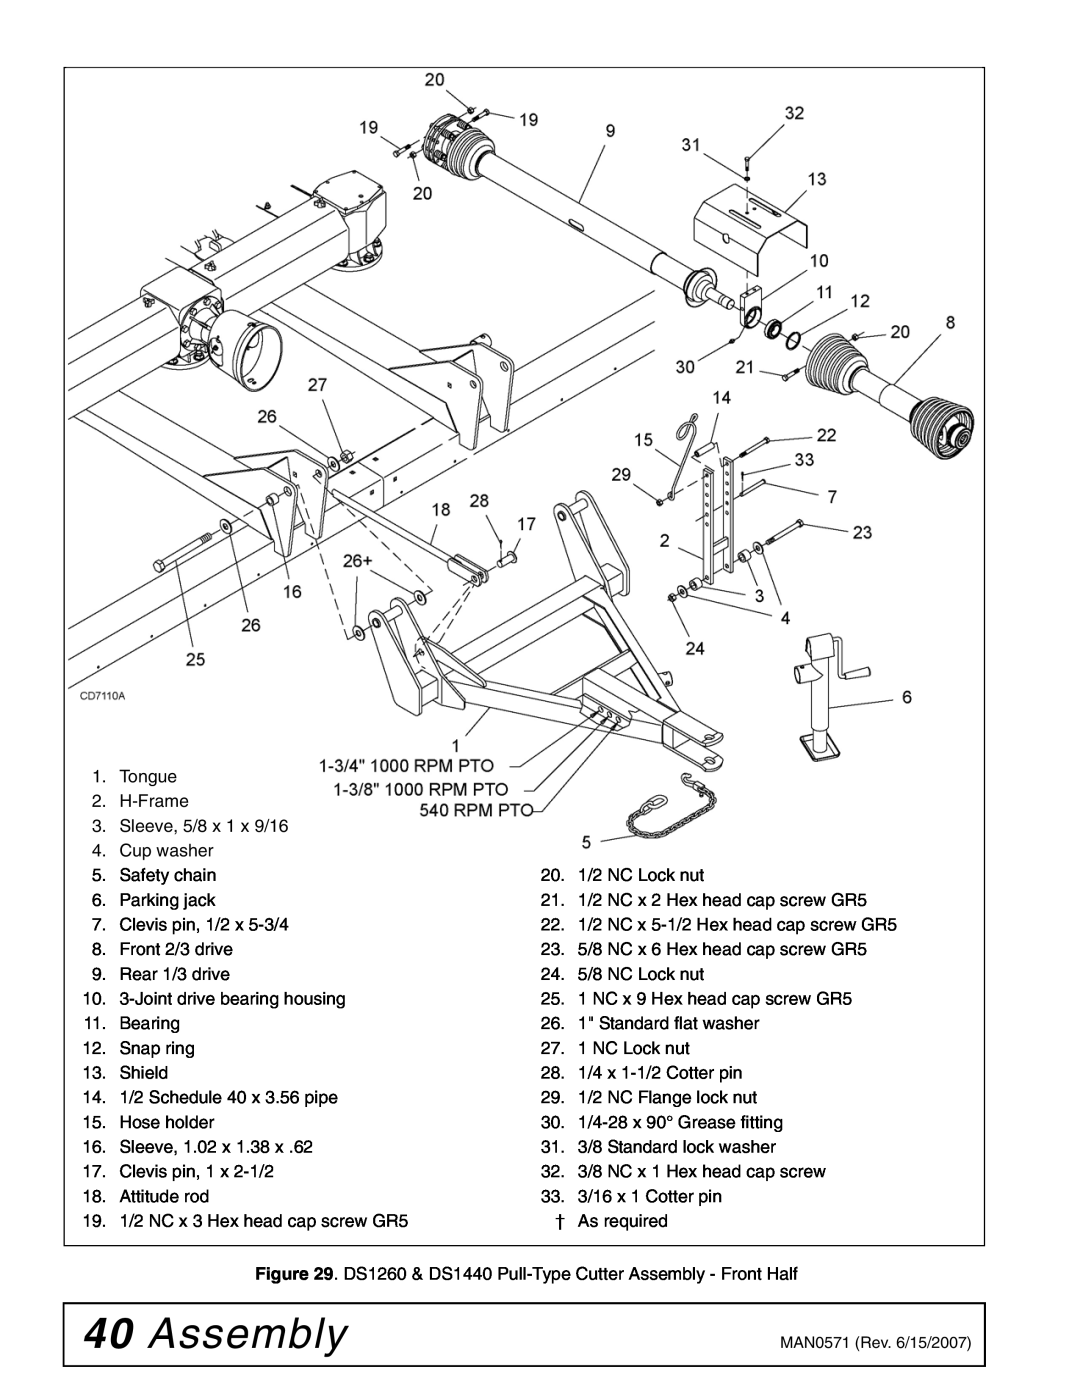 Woods Equipment DSO1260Q, DS1440Q, DS1260Q manual Assembly 